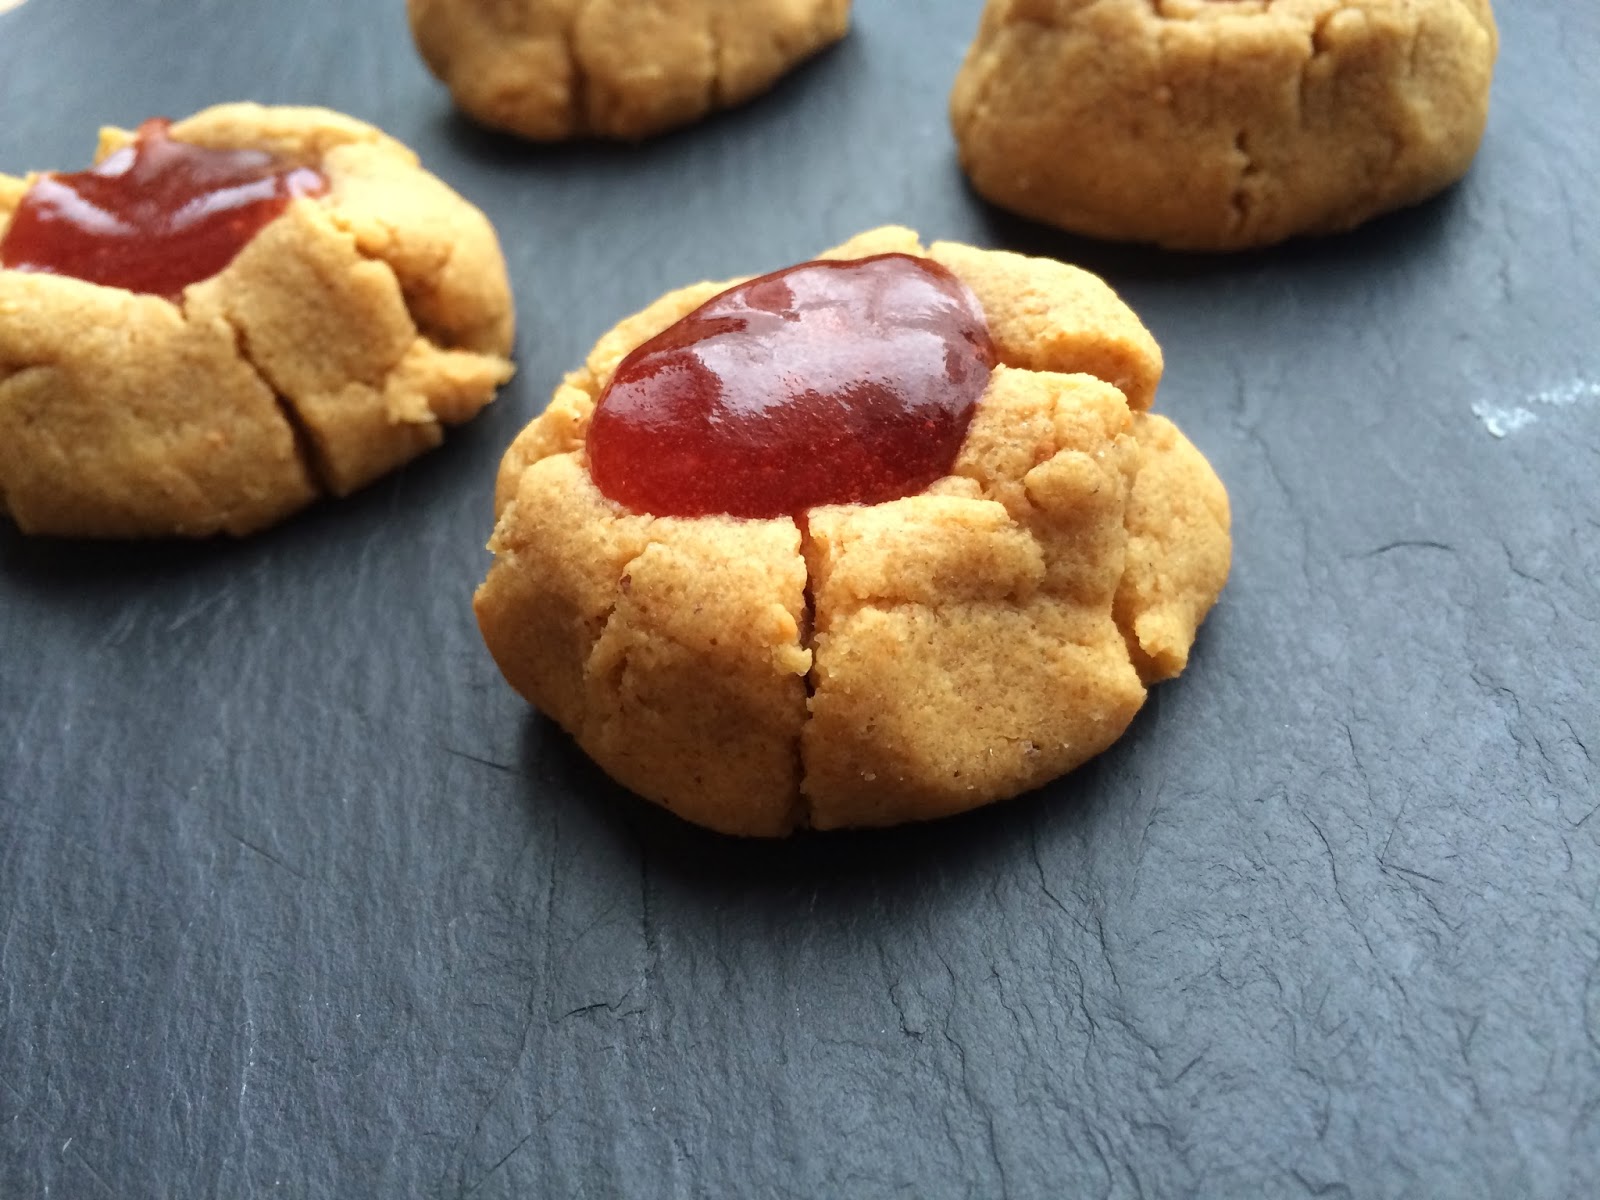 Gluten-Free Peanut Butter and Jelly Cookies